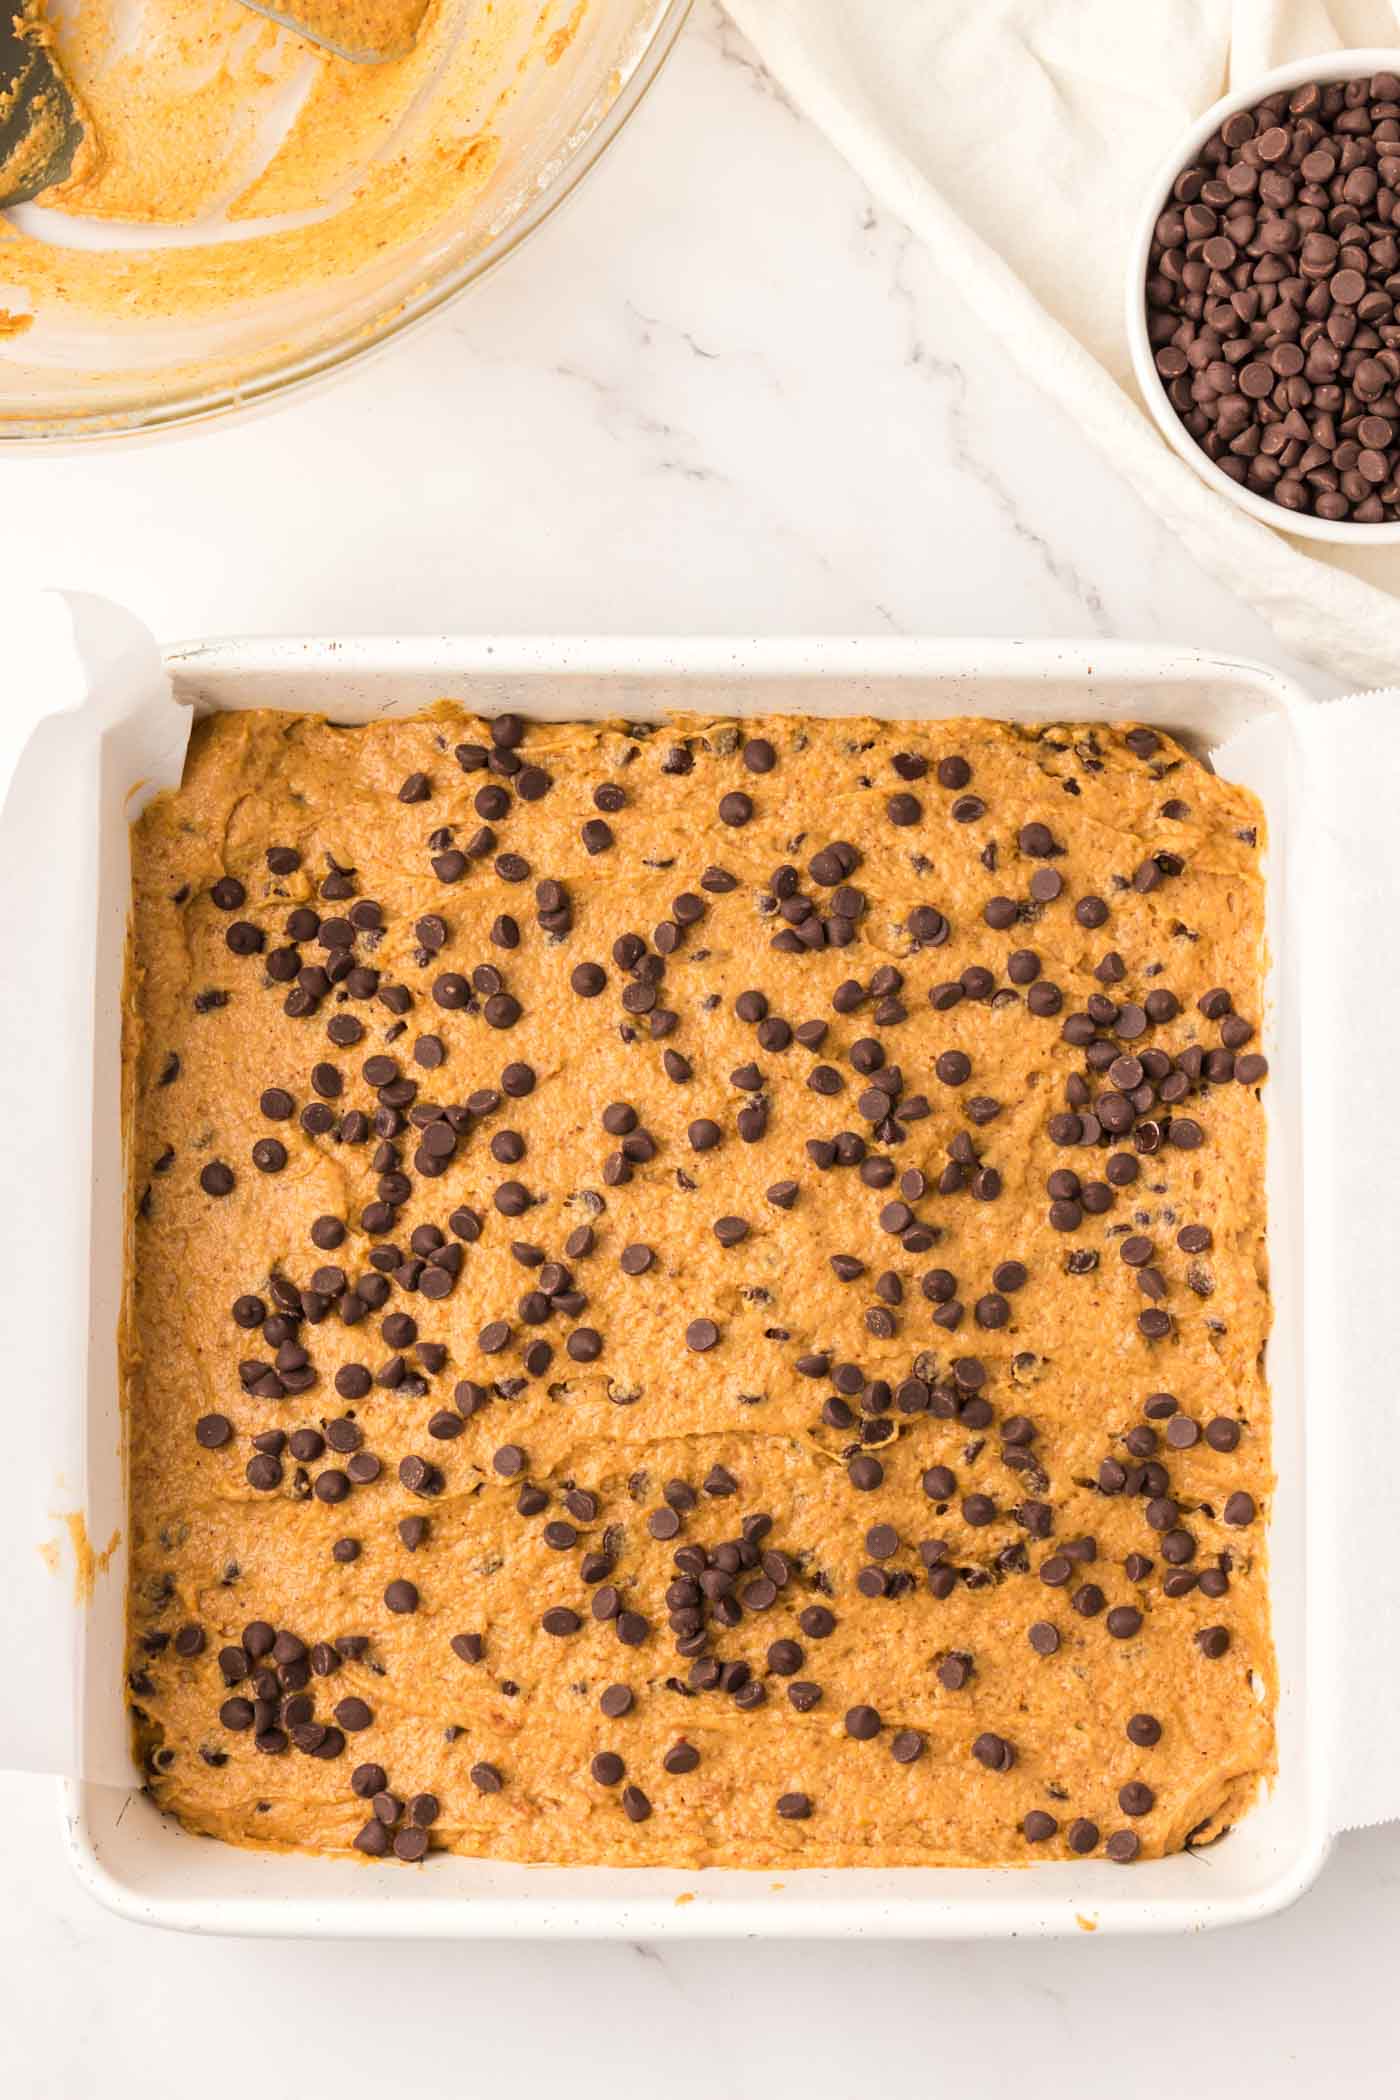 Unbaked pumpkin chocolate chip bars in a baking pan lined with parchment paper.